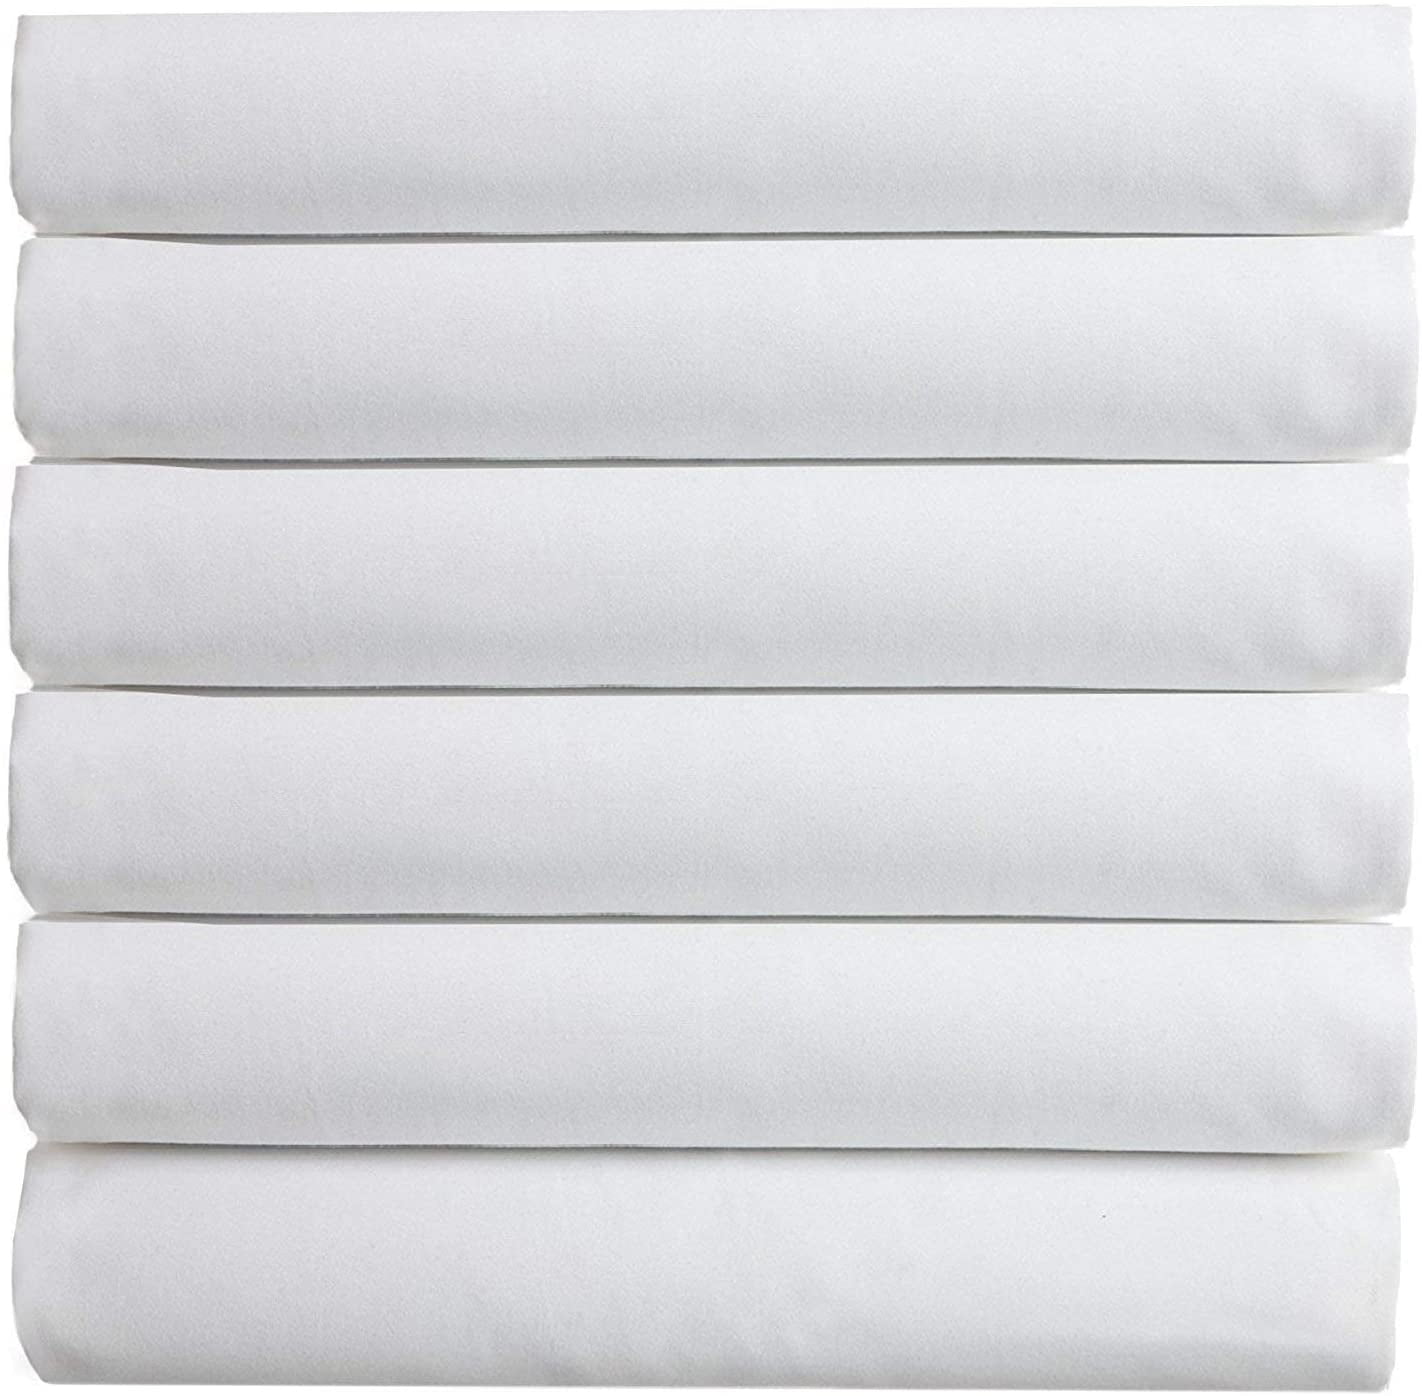 3 queen size white fitted sheet 60x80x12 t-200 percale hotel grade  deep pocket 